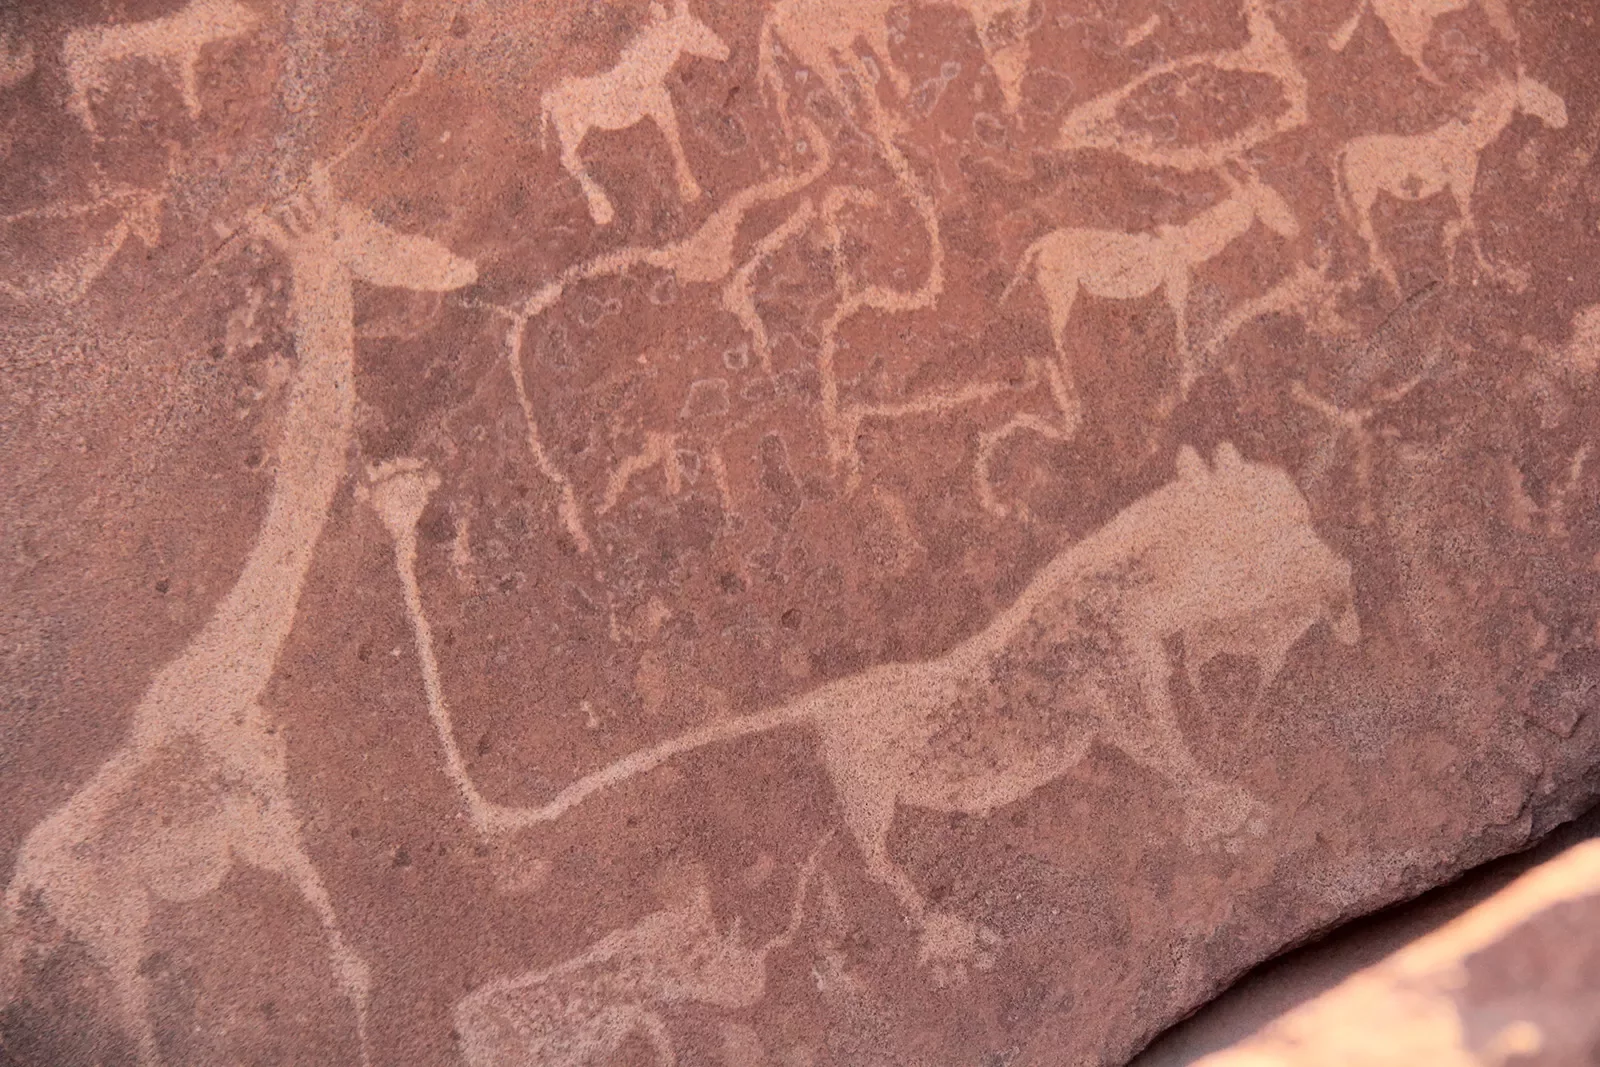 Cave drawings mostly of animals